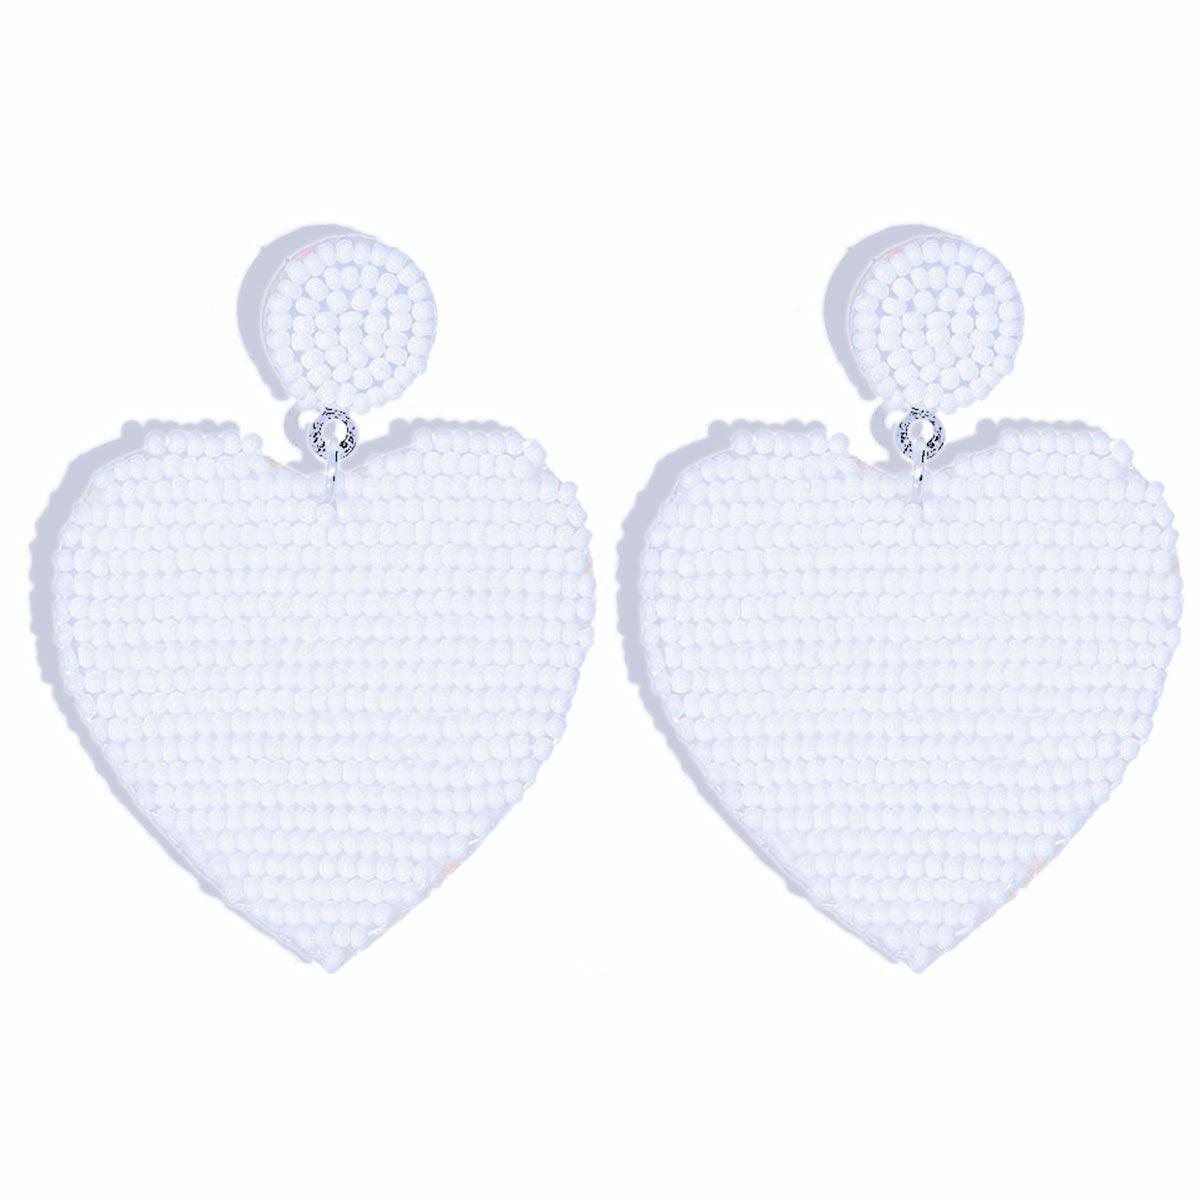 Feel the Love: White Heart Earrings for Every Style